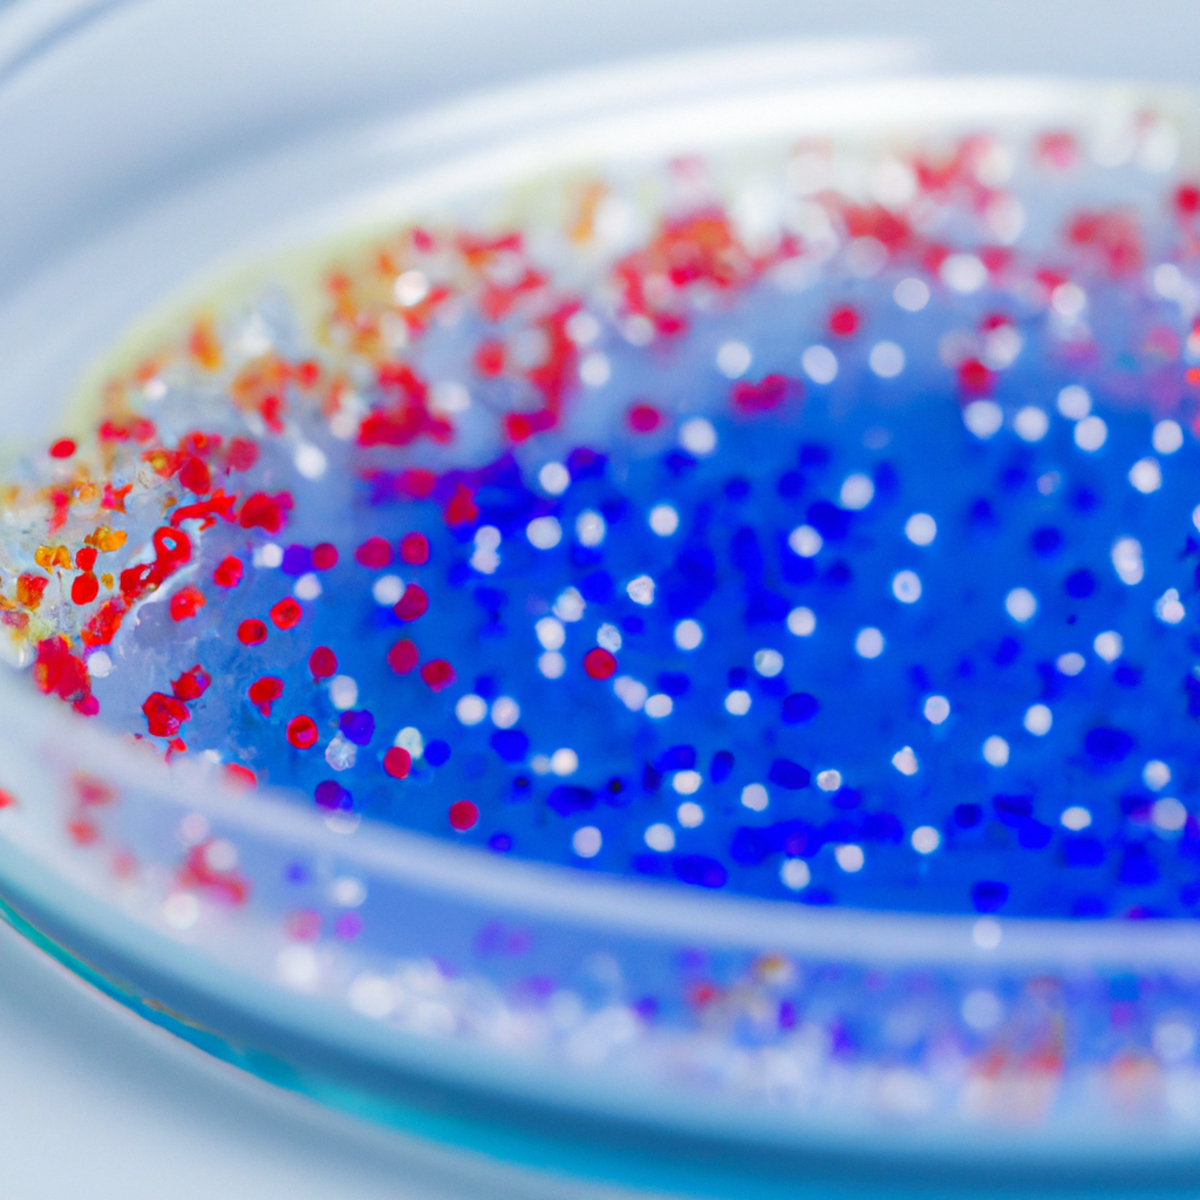 Petri dish with colored substances on lab table with microscope - Alpha-1 Antitrypsin Deficiency